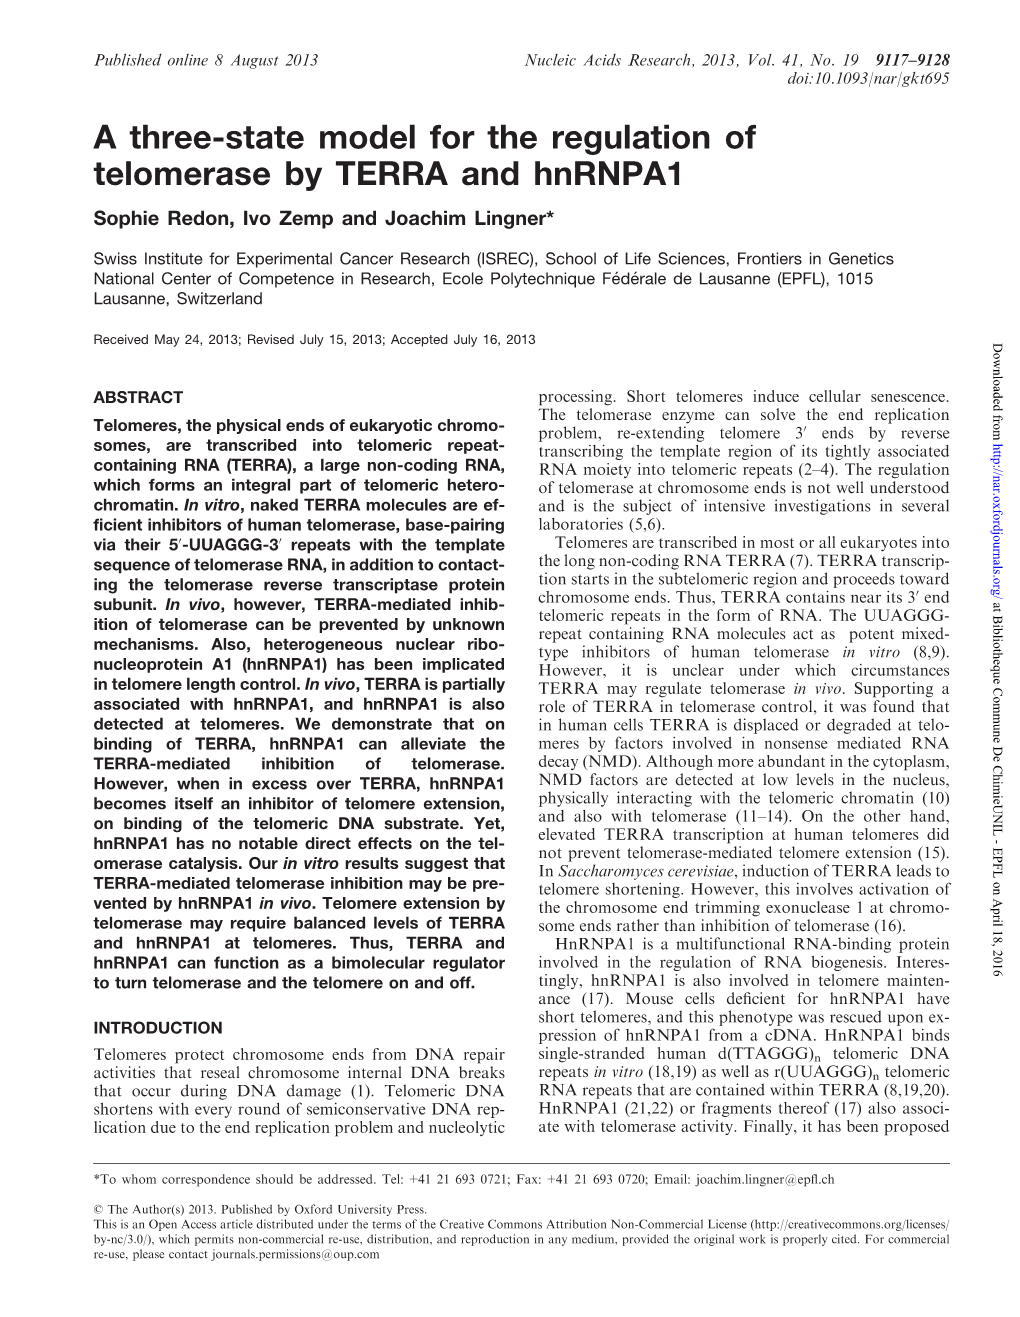 A Three-State Model for the Regulation of Telomerase by TERRA and Hnrnpa1 Sophie Redon, Ivo Zemp and Joachim Lingner*